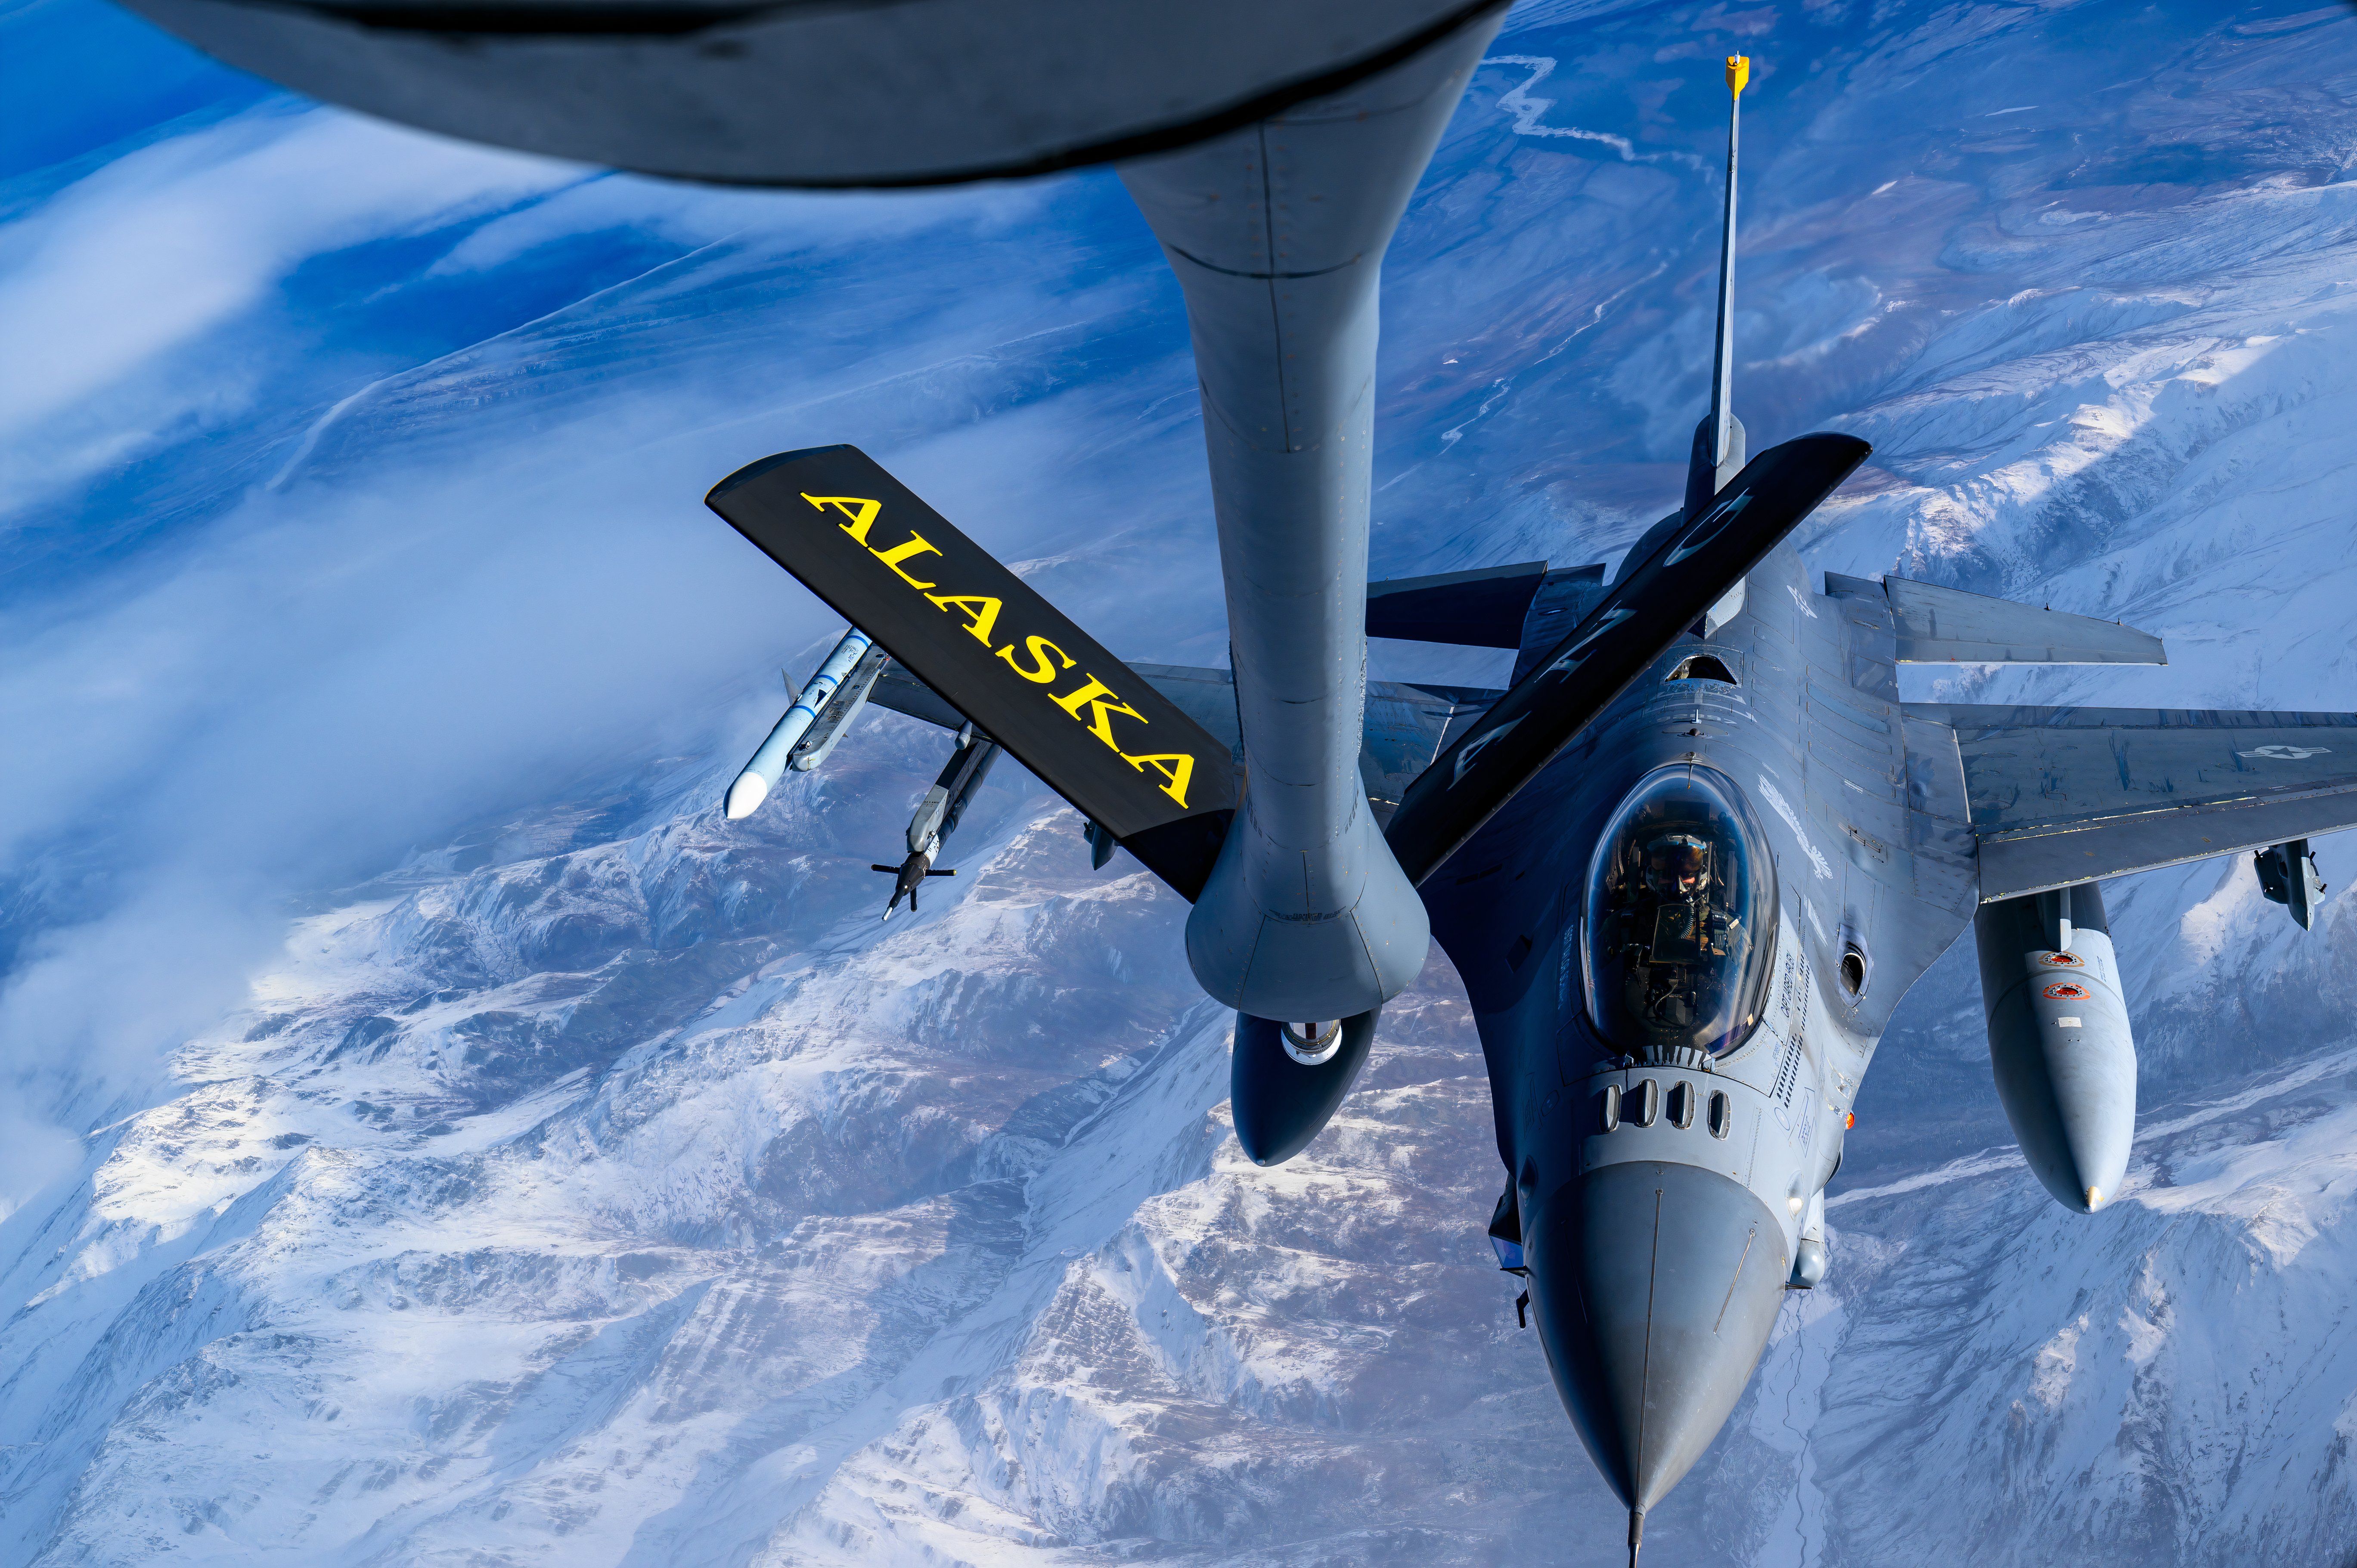 n F-16 Fighting Falcon moves into position to receive fuel from a 168th Air Refueling Wing KC-135 Stratotanker